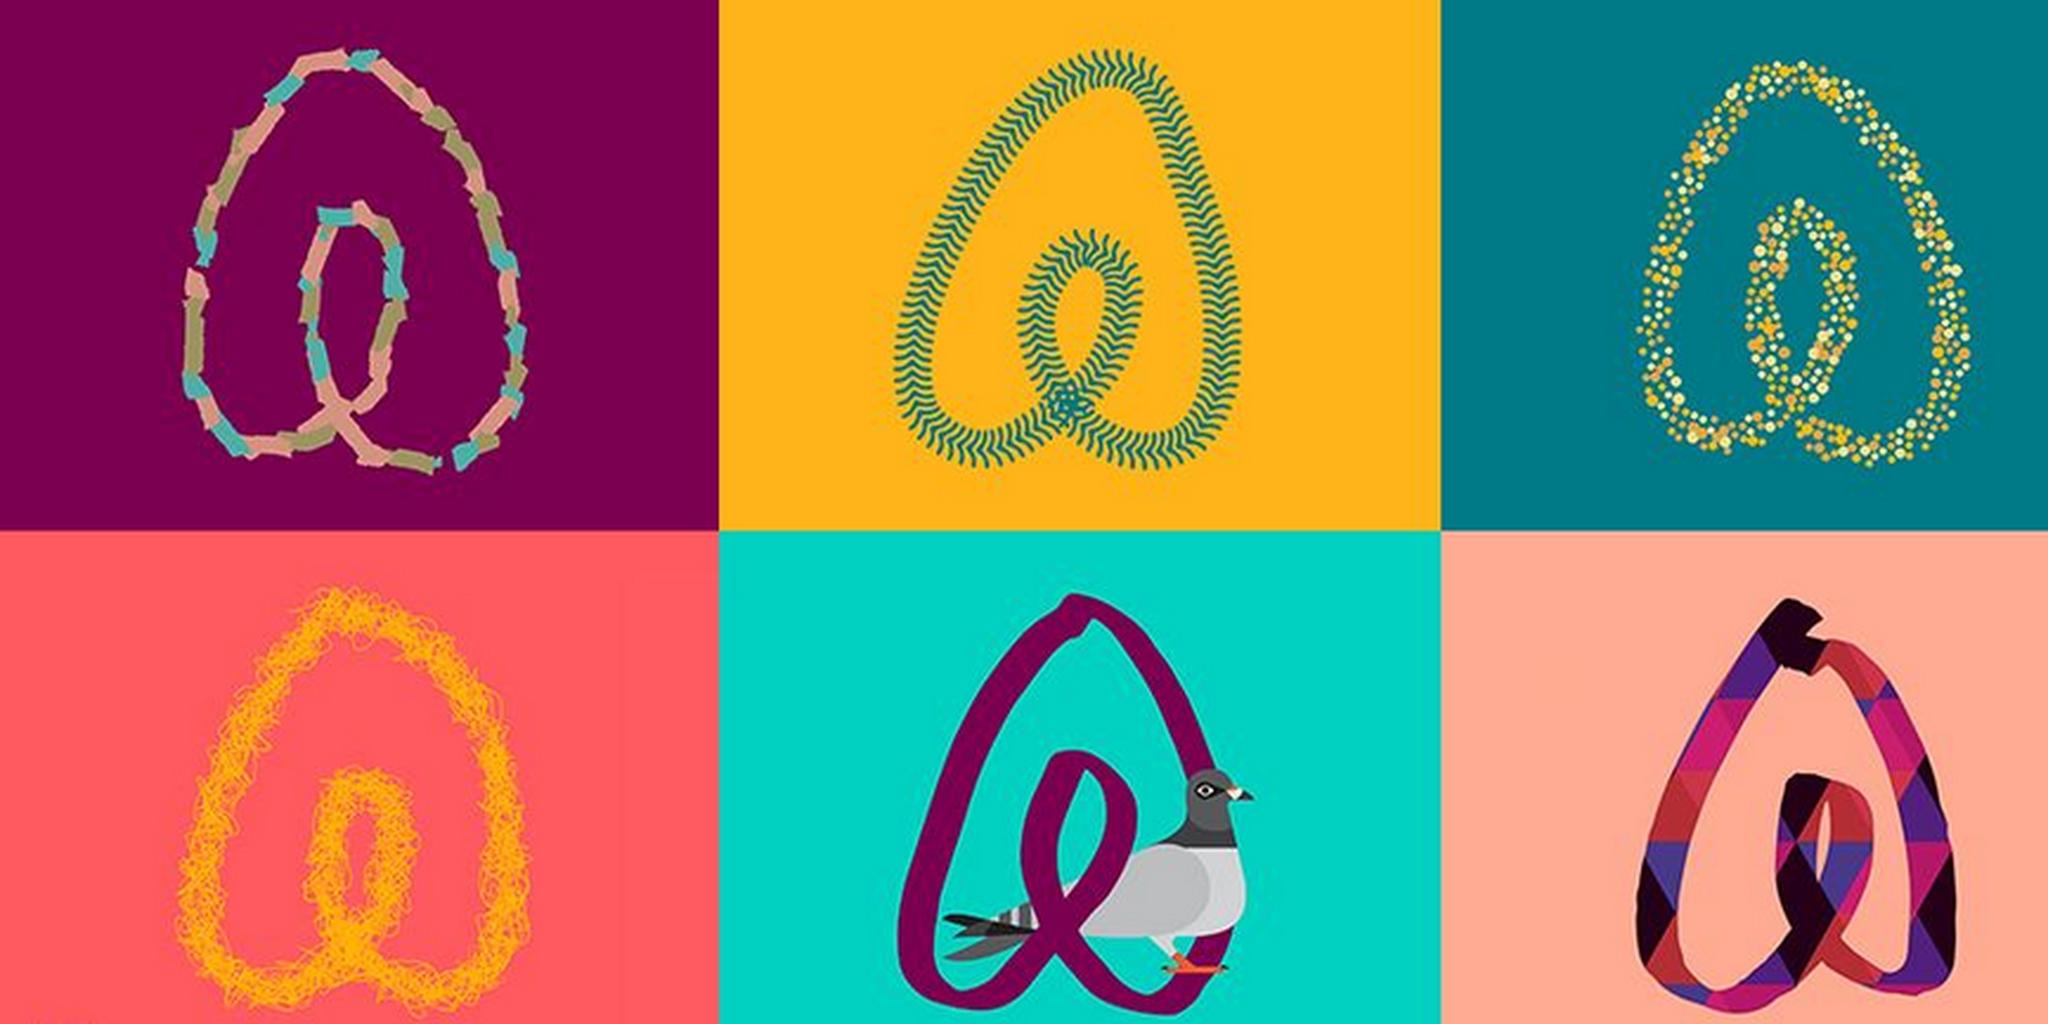 Airbnb New Logo - There's a Tumblr devoted to remixing Airbnb's new logo